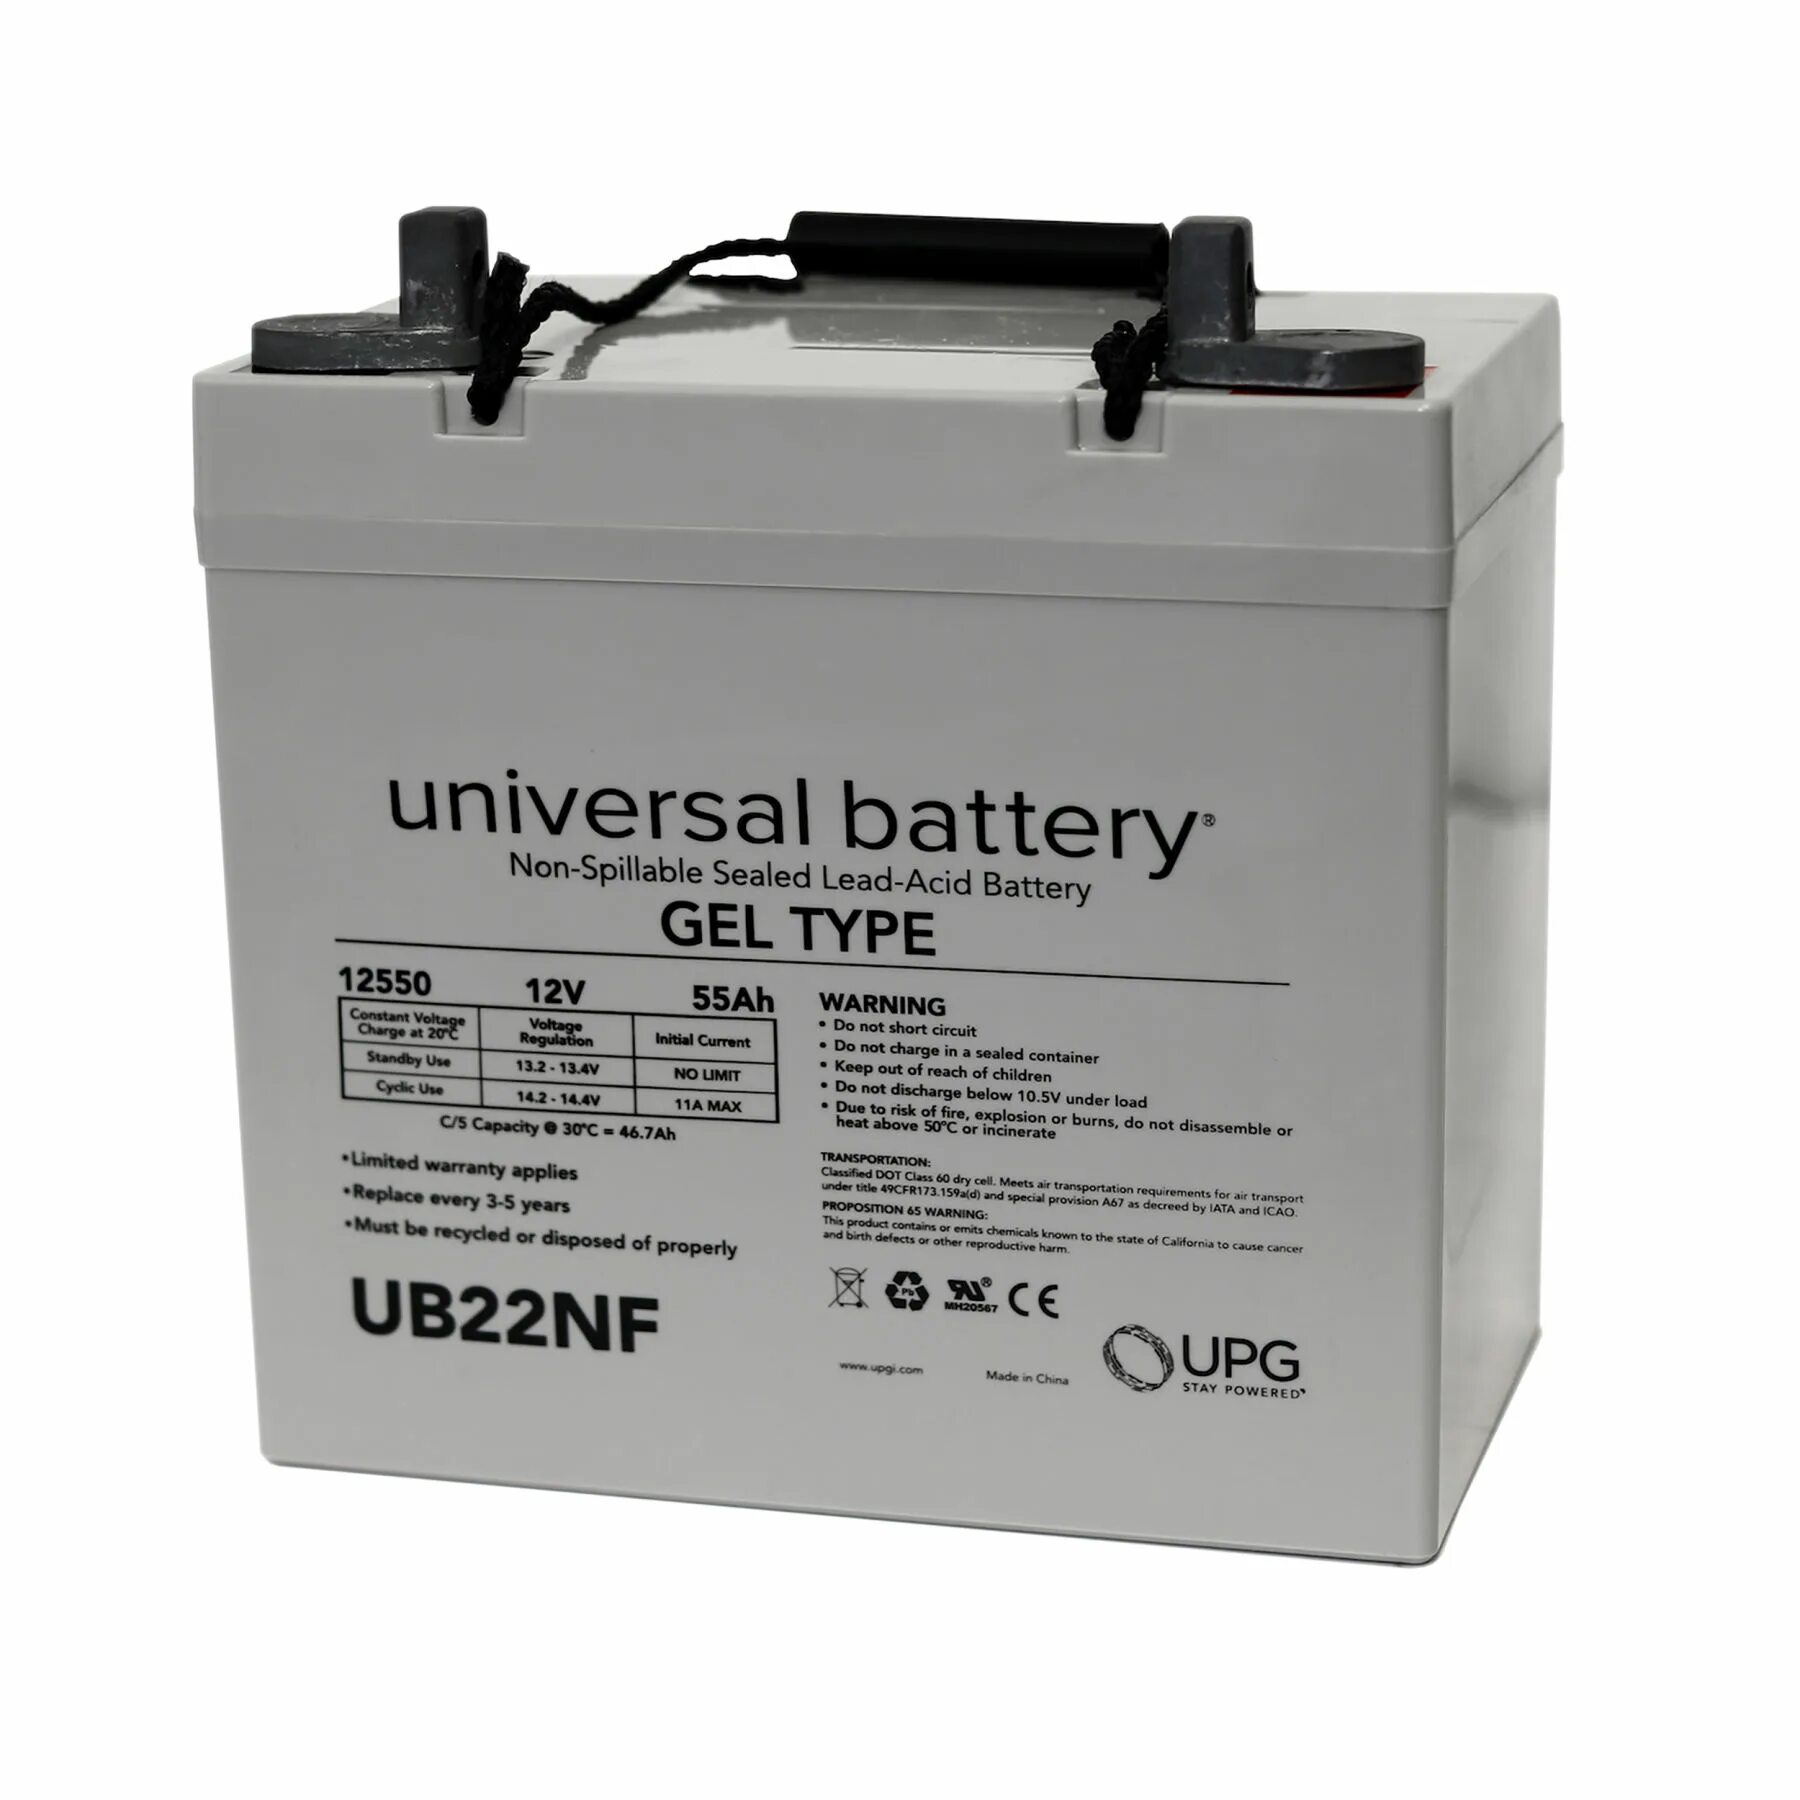 12v 75ah Sealed lead acid Battery. Battery: Sealed non Spillable 120ah Philidas. Battery- 55 Ah/850ca. Non-Spillable аккумулятор. Gel battery